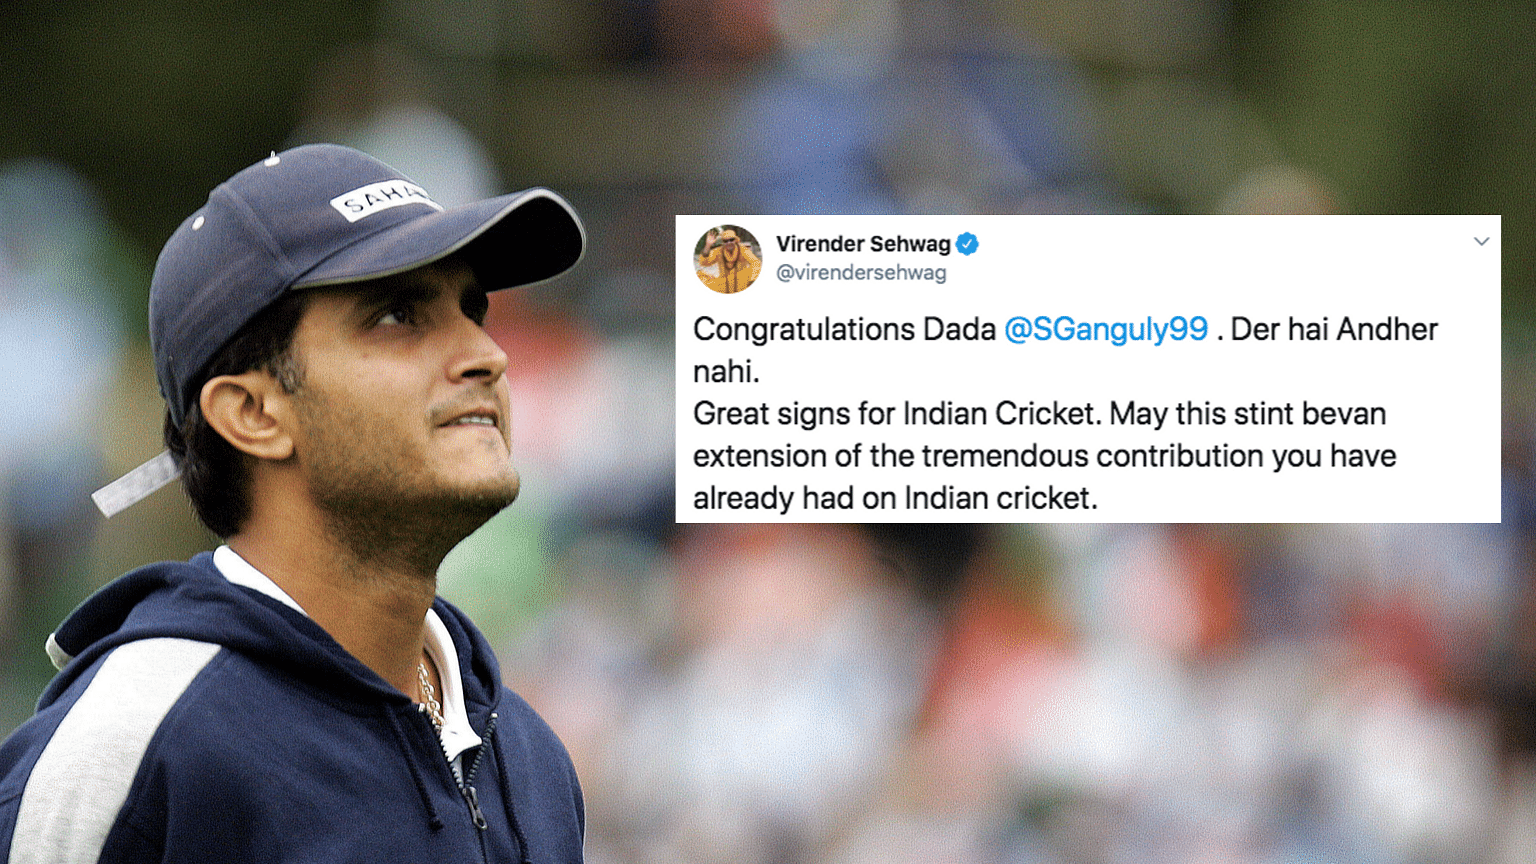 The cricketing fraternity including his former teammates congratulated Sourav Ganguly for becoming BCCI President-elect.